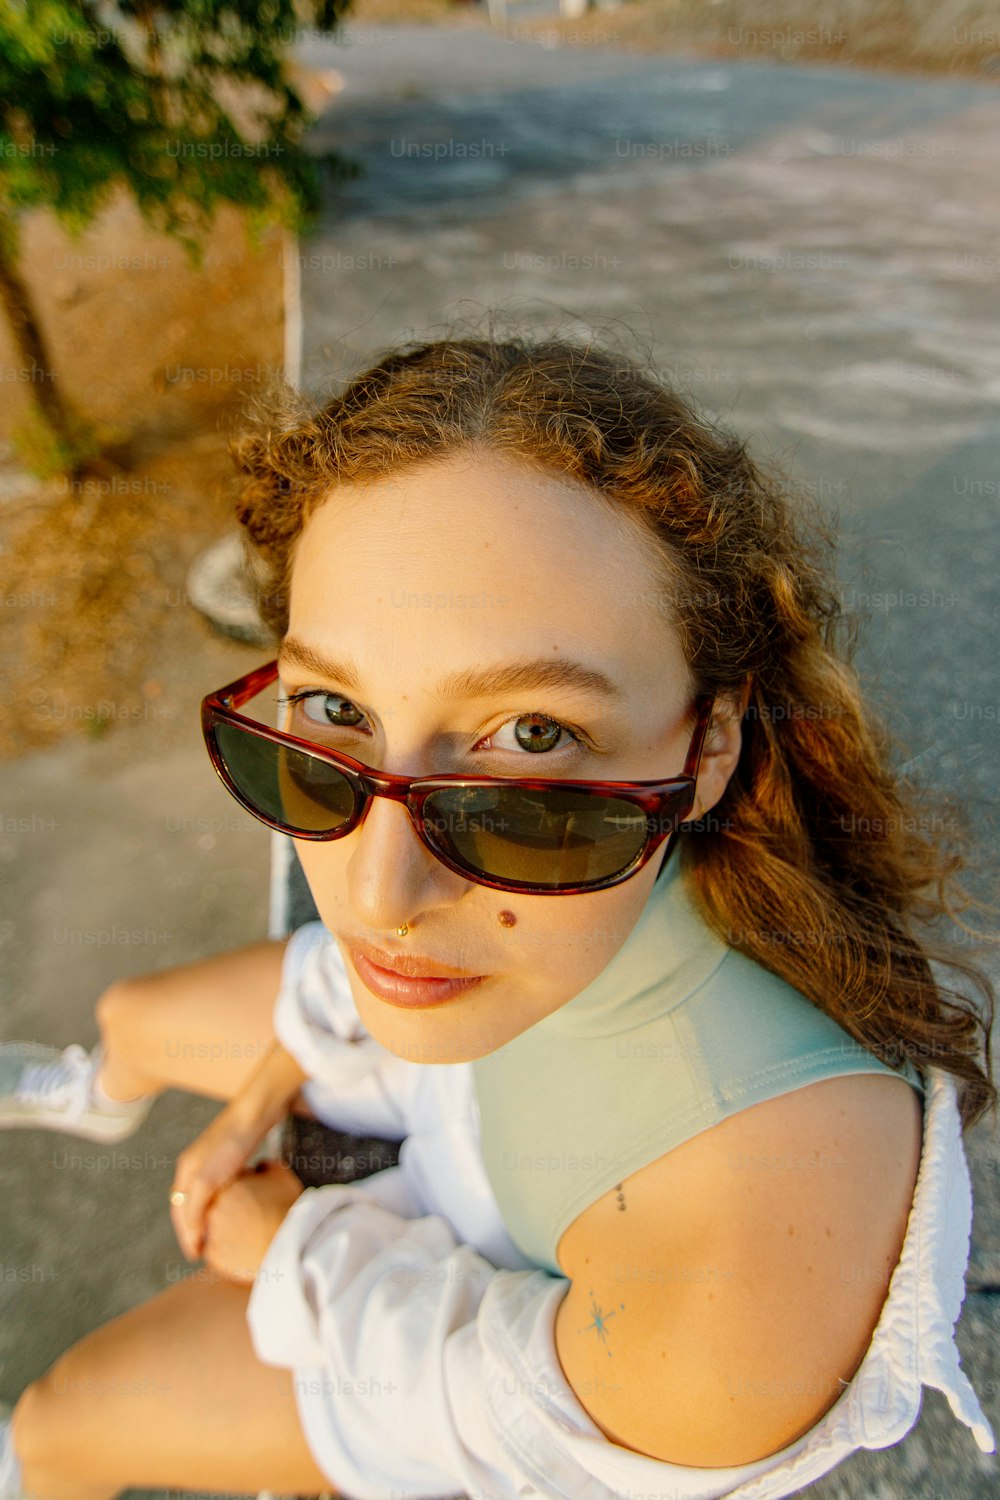 a woman wearing sunglasses sitting on a bench